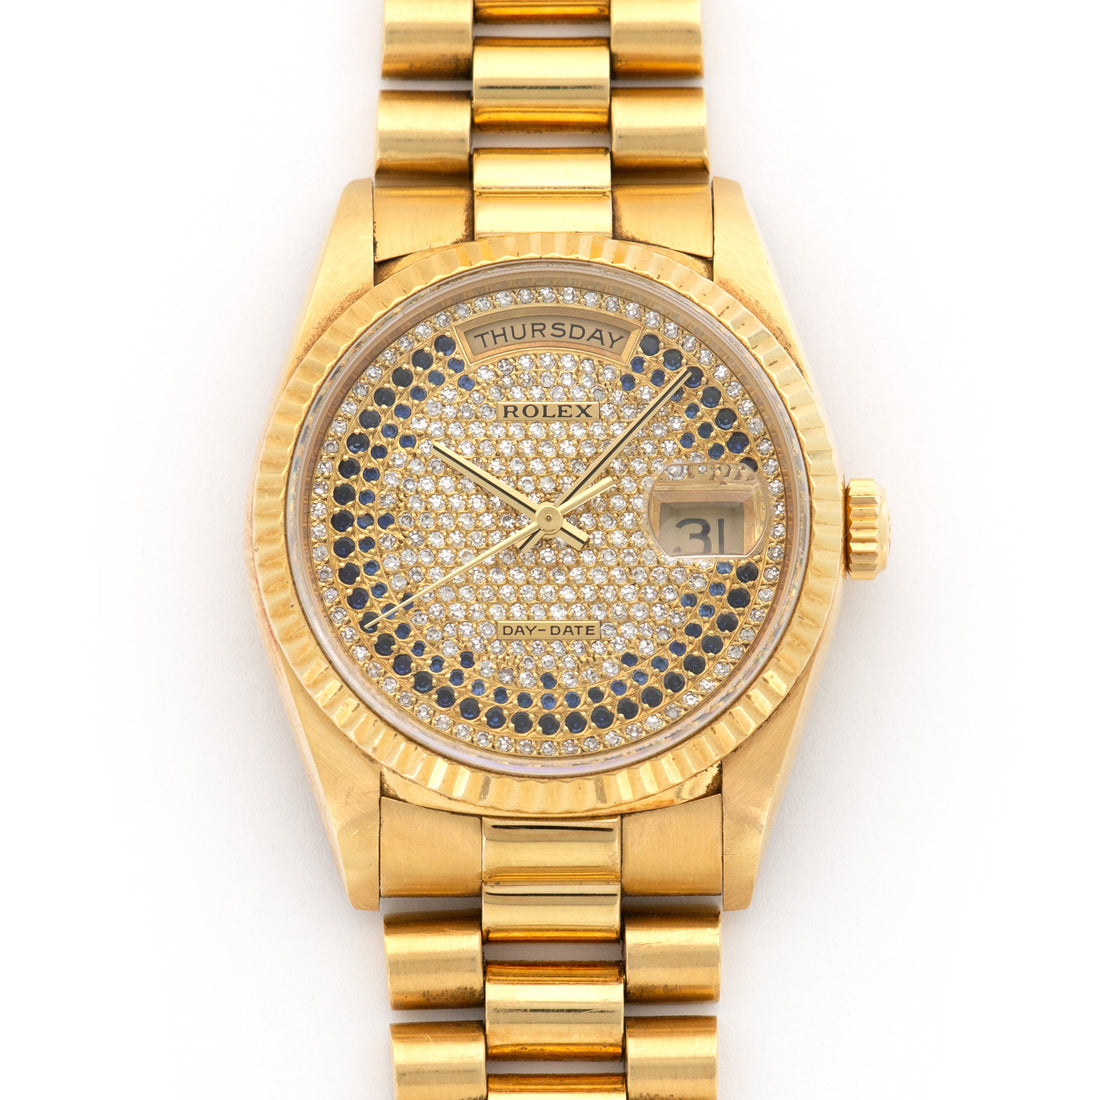 Rolex Day-Date Yellow Gold with Pave Dial Ref. 18238